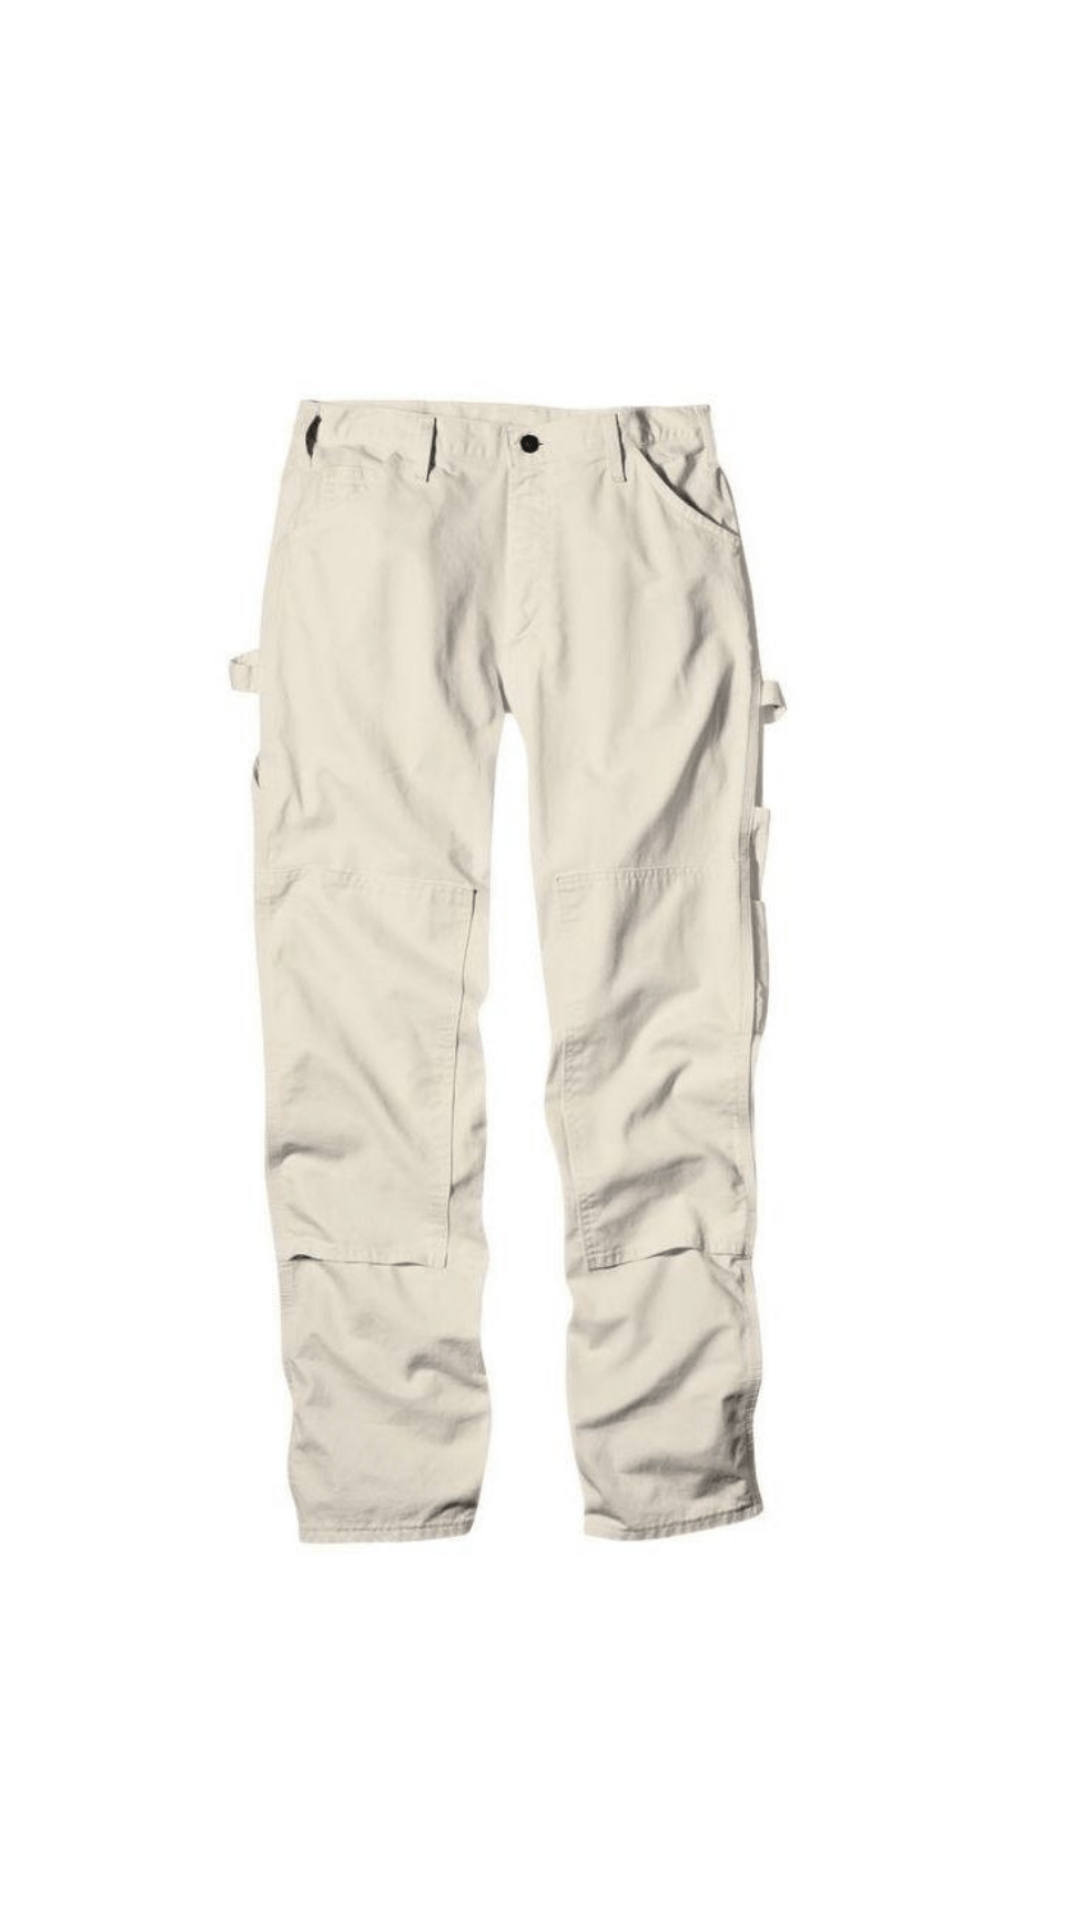 Men's beige colored Dickies work pants with loops on the sides